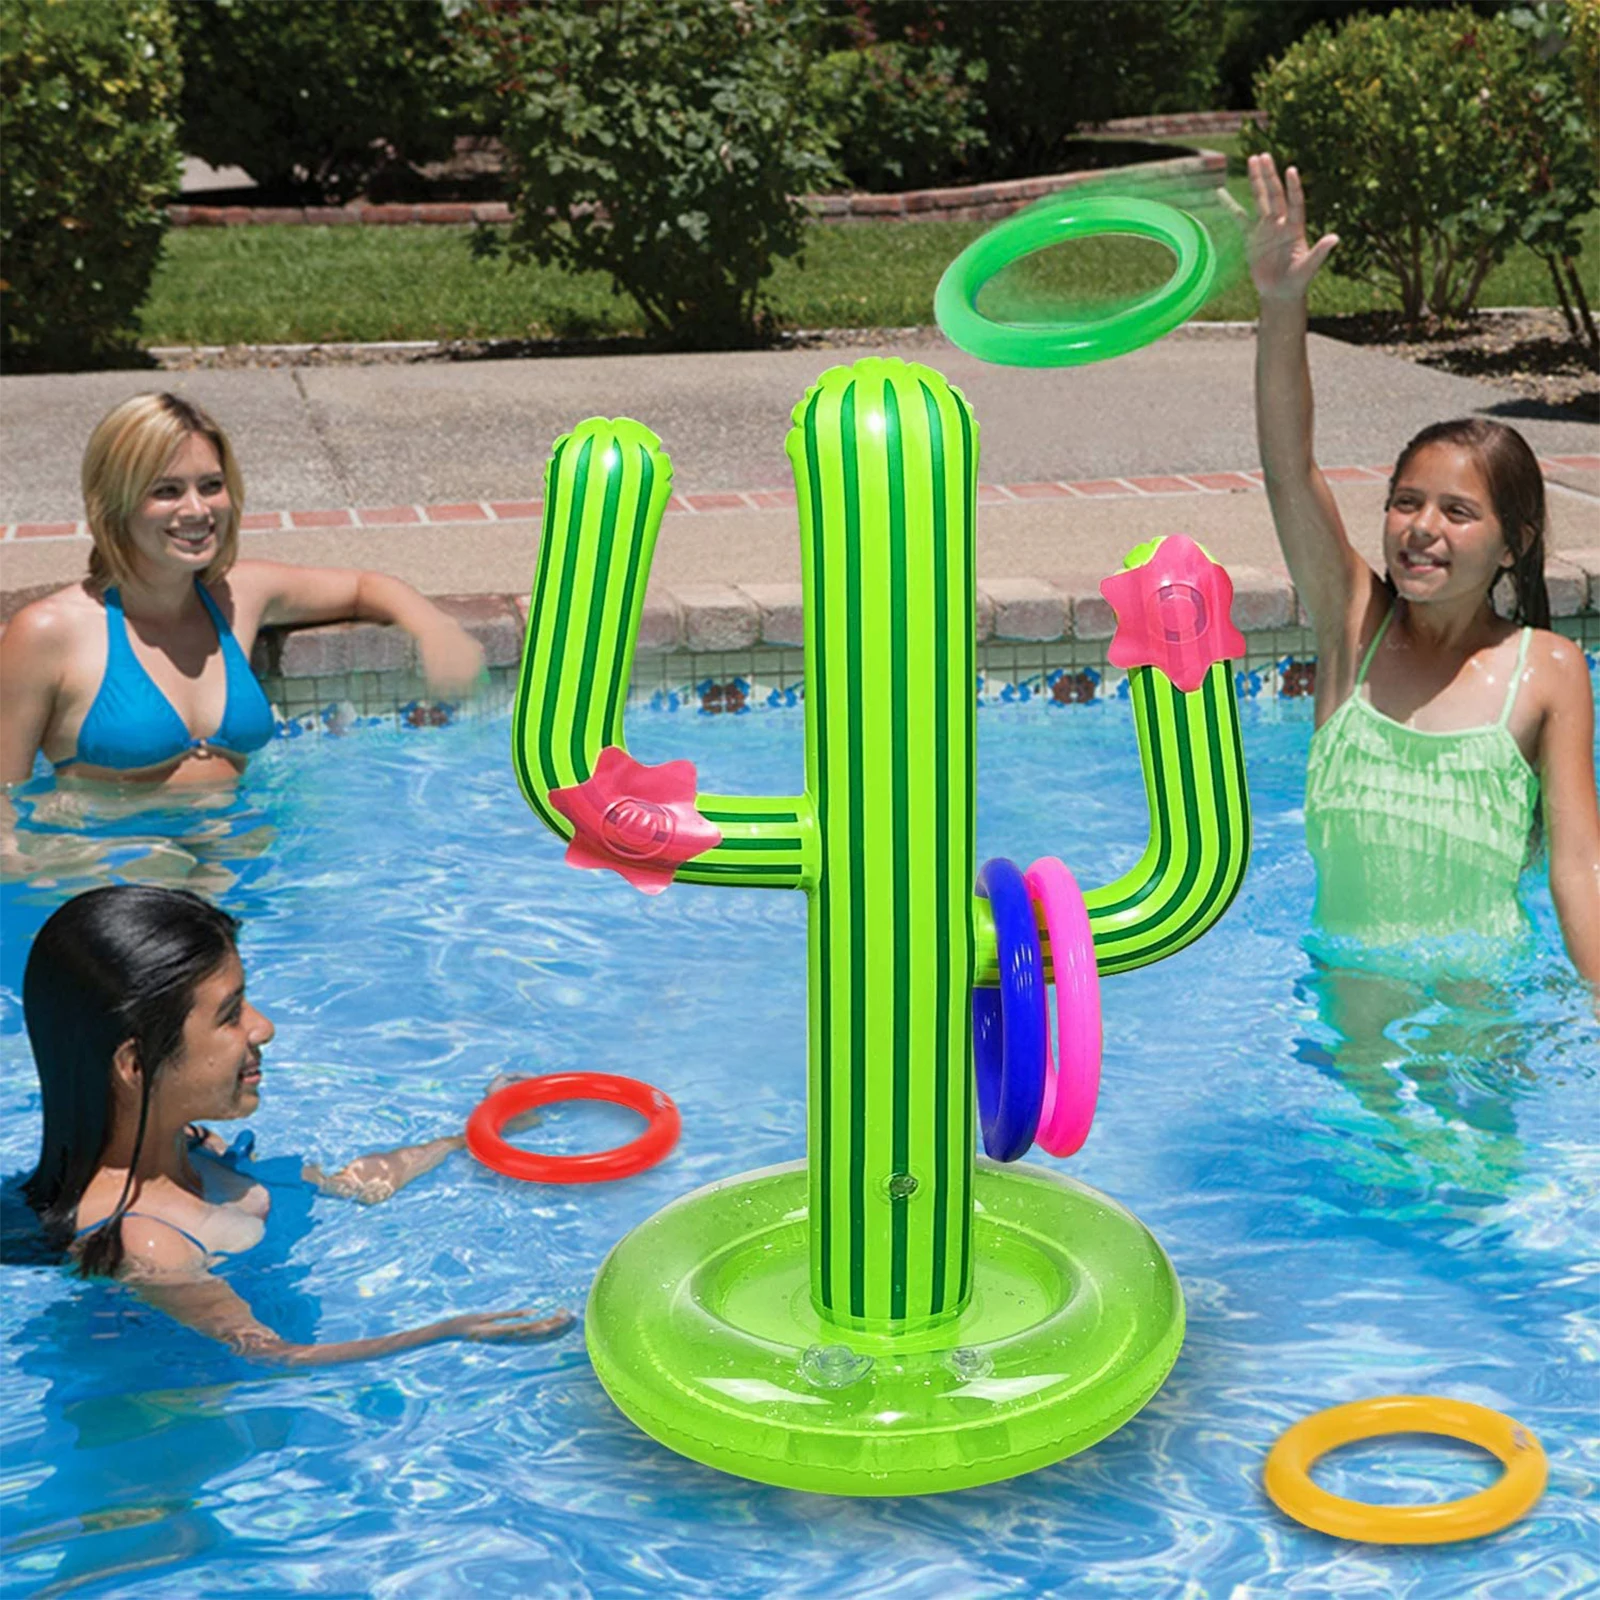 

5PCS/Set PVC Inflatable Cactus Casting Ring Toy Floating Ring Toss Swimming Beach Party Bar Party Throwing Circle Game Pool Toys